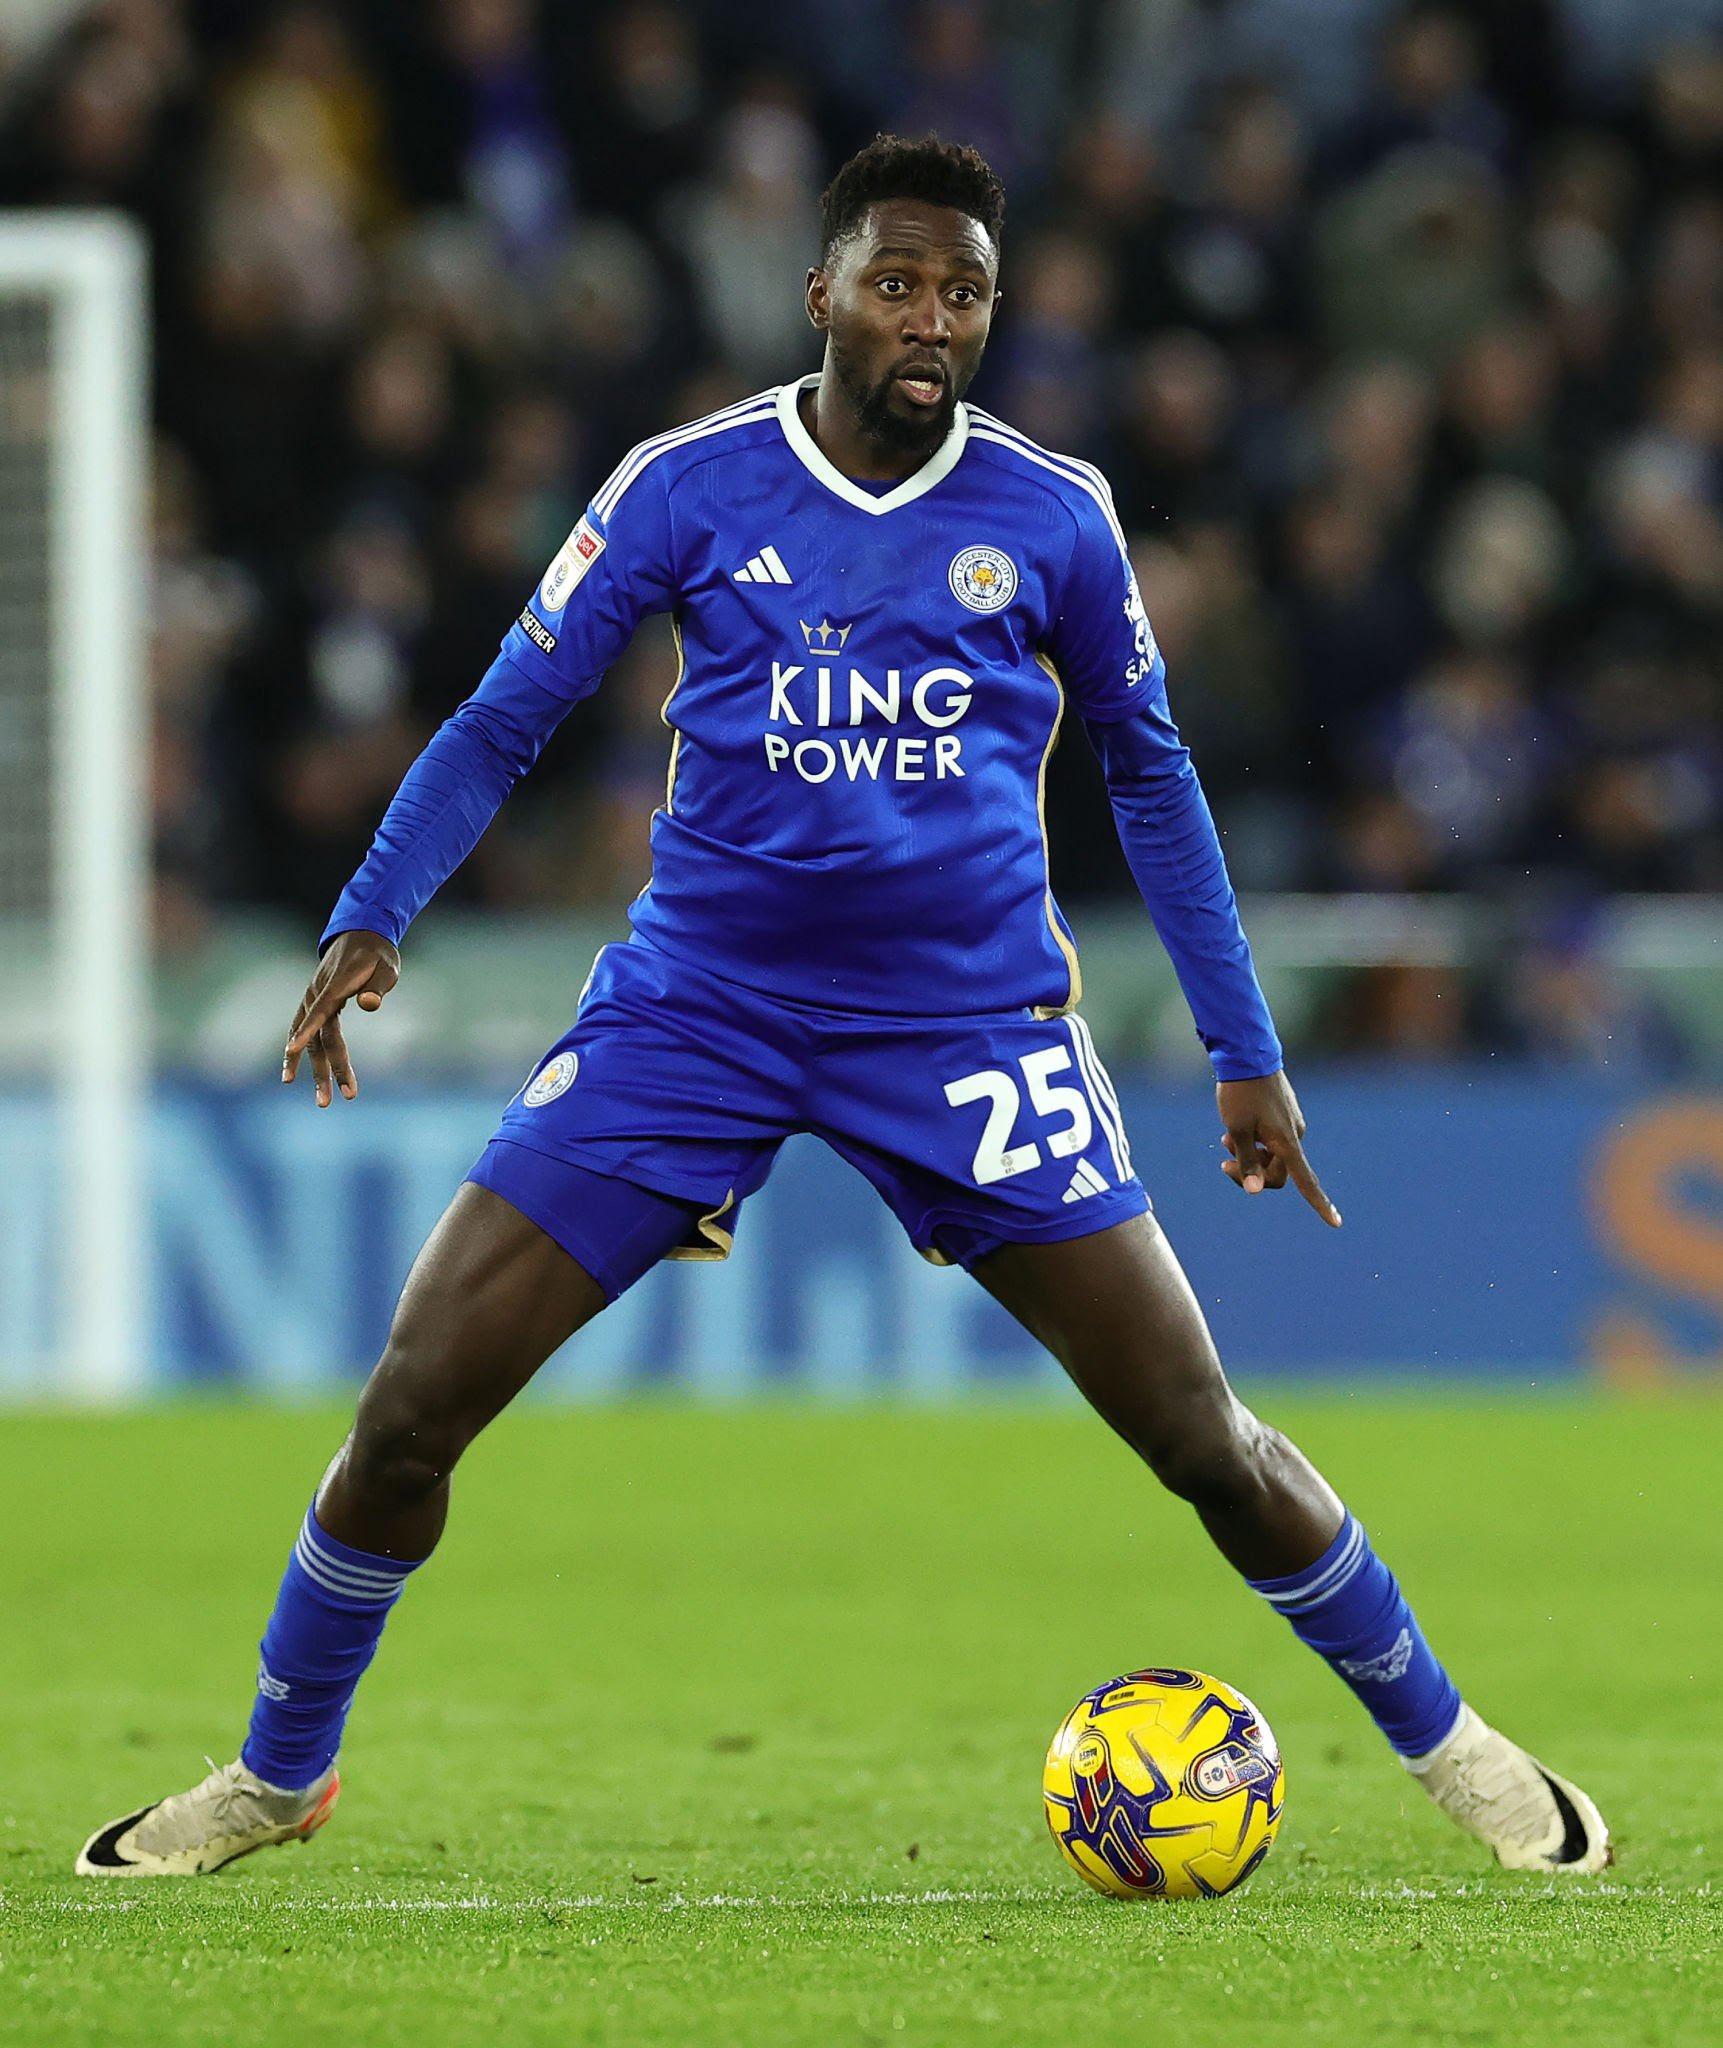 EFL: Wilfred Ndidi returns in Leicester City's win over Sunderland